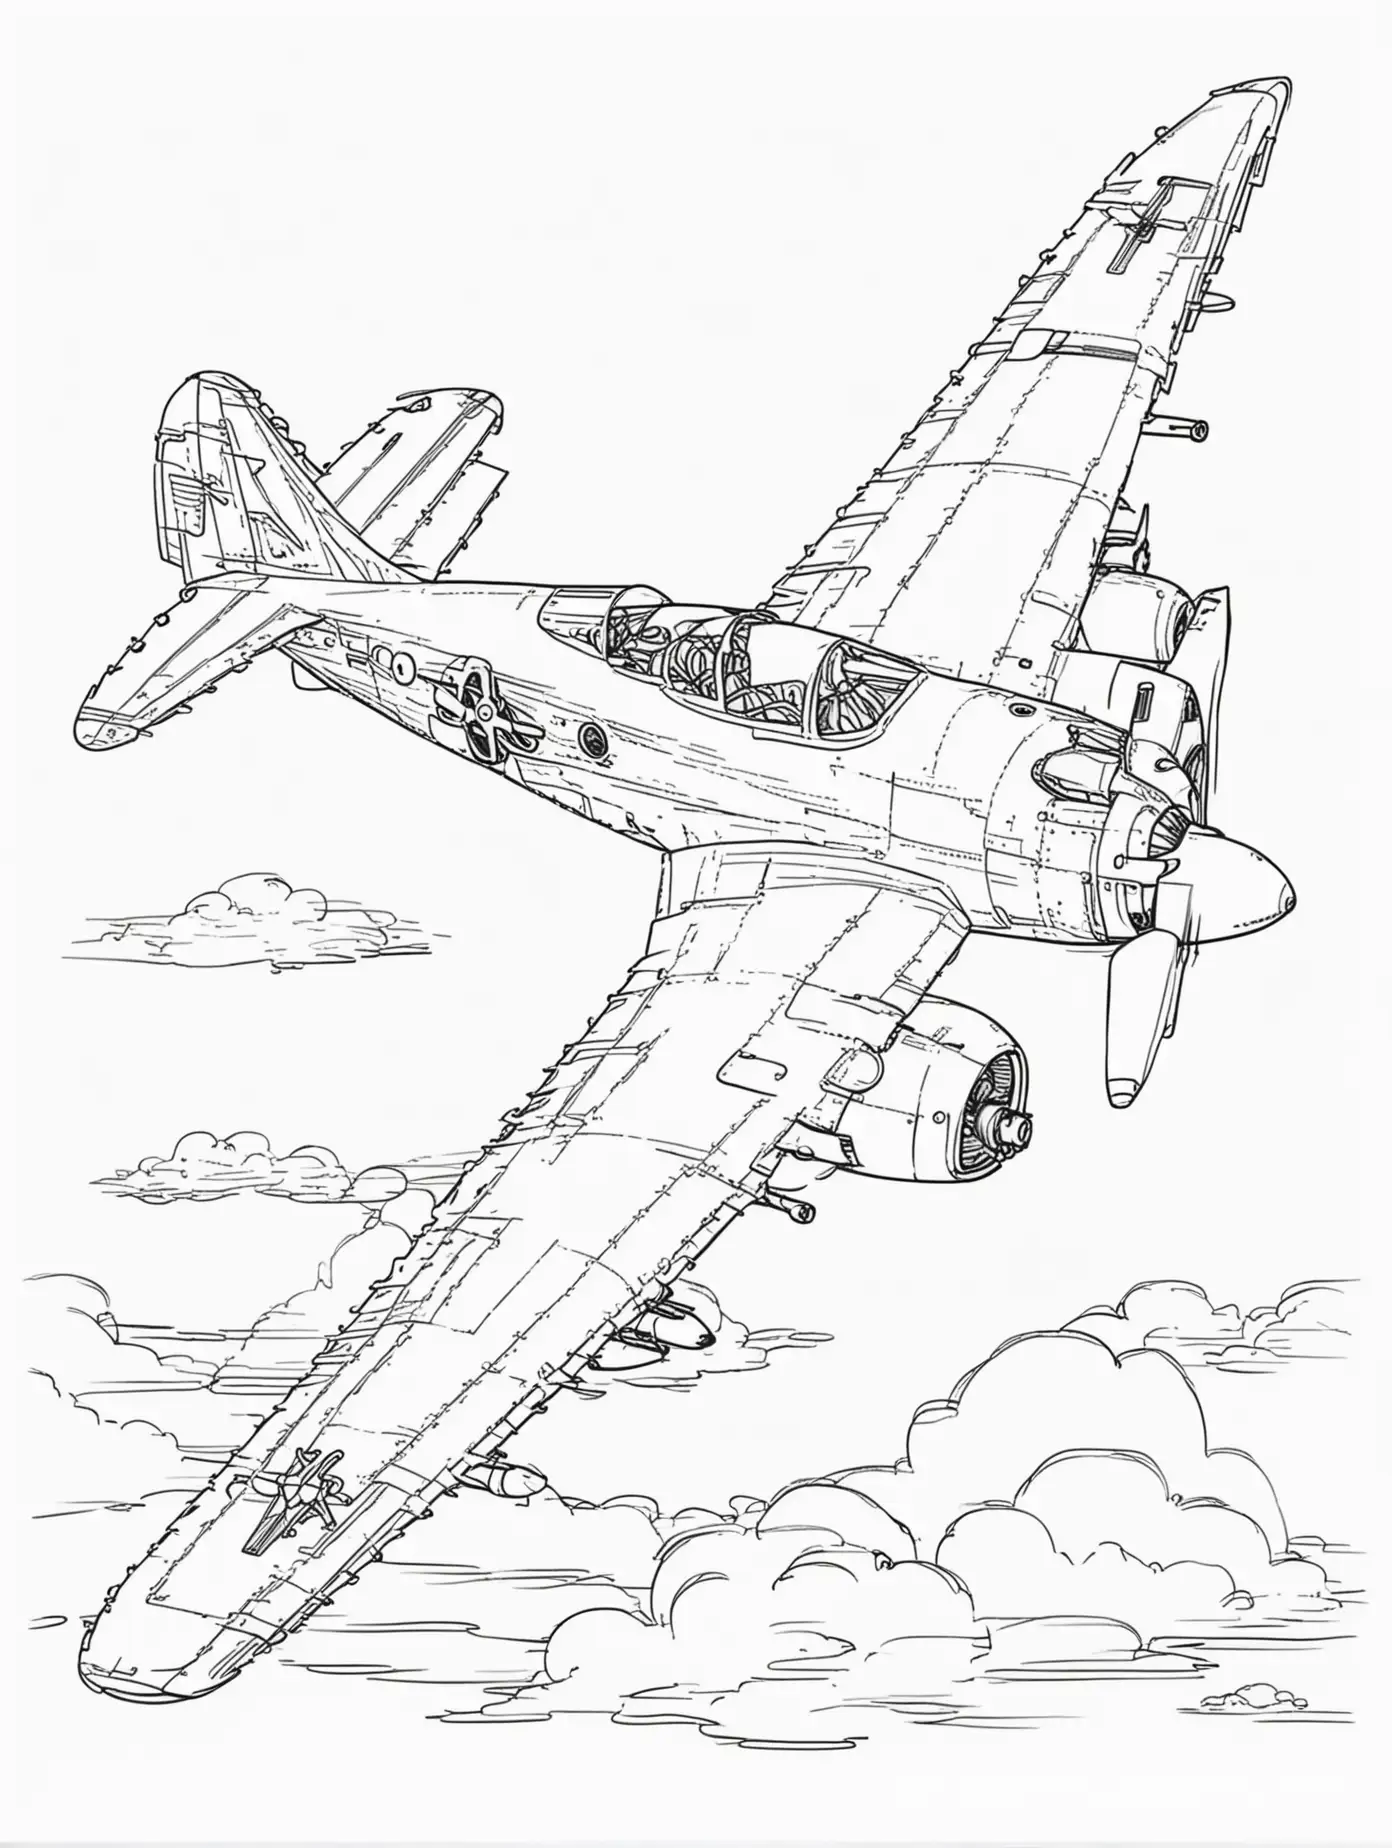 bombing plane, Coloring Page, black and white, line art, white background, Simplicity, Ample White Space. The background of the coloring page is plain white to make it easy for young children to color within the lines. The outlines of all the subjects are easy to distinguish, making it simple for kids to color without too much difficulty